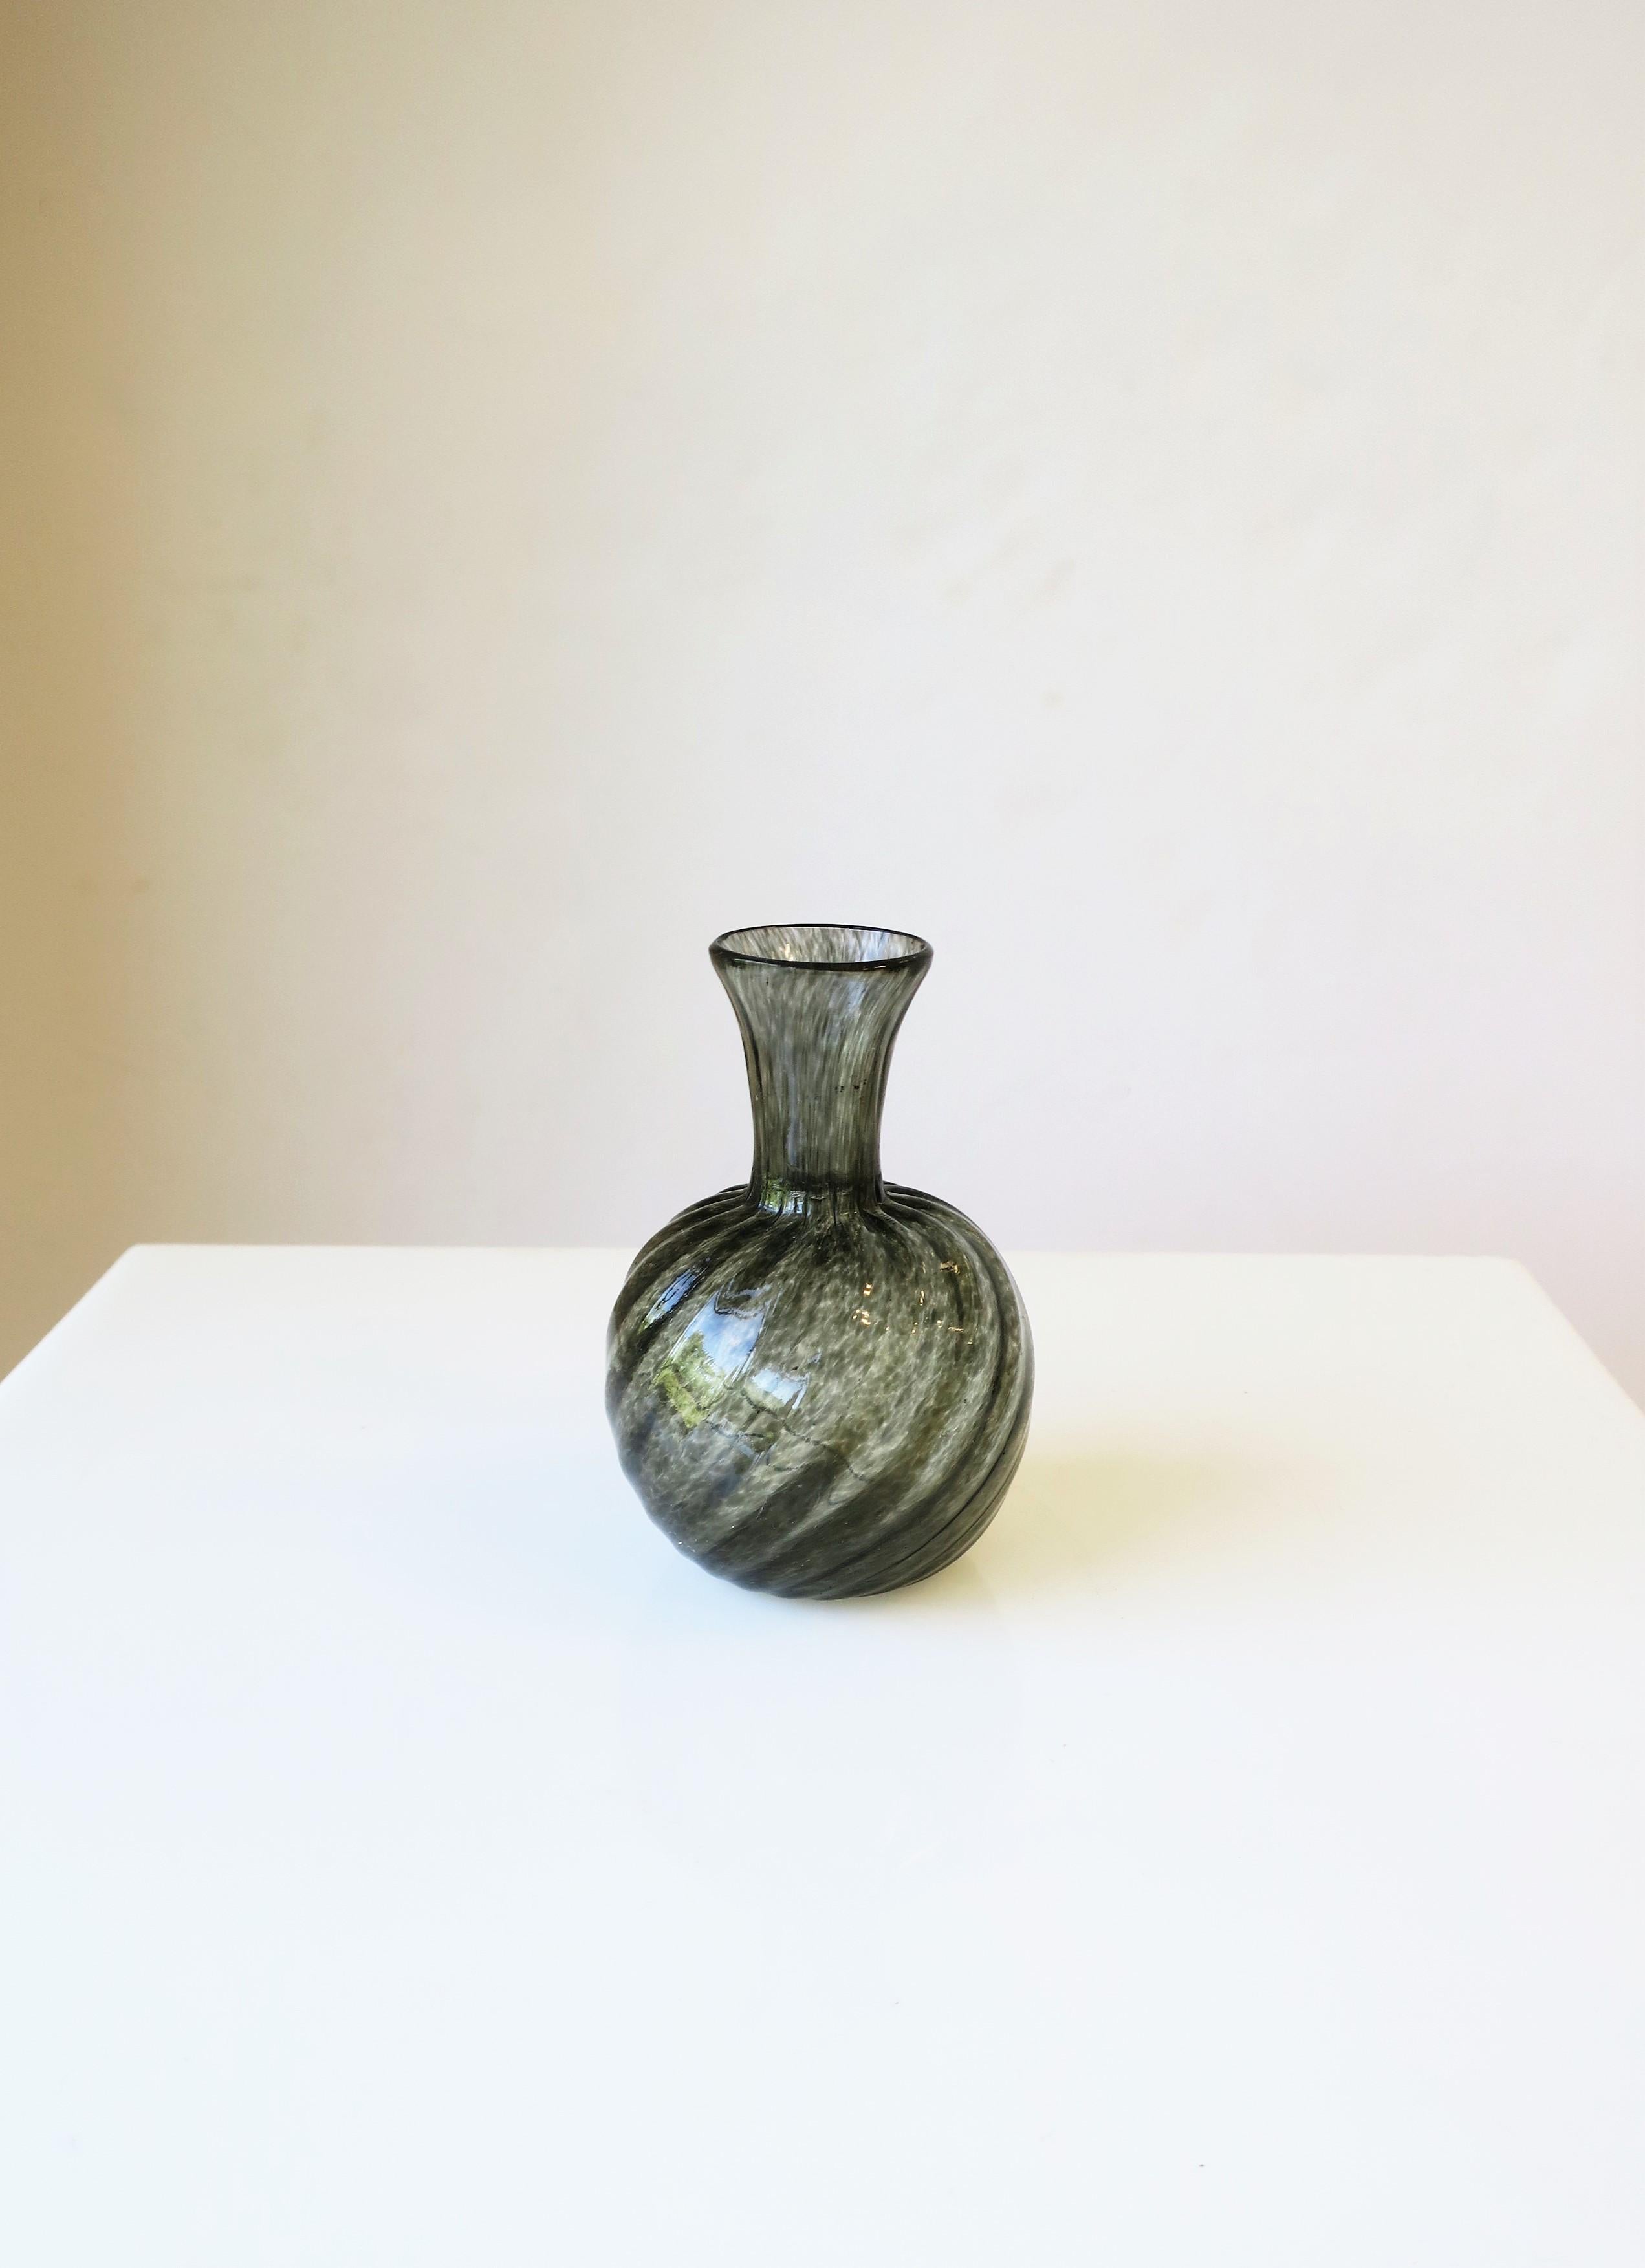 A small black-grey art glass vase with a twisted fluted design, circa late-20th century, Europe. Beautiful as a standalone piece as demonstrated or with a flower or two. Dimensions: 2.75